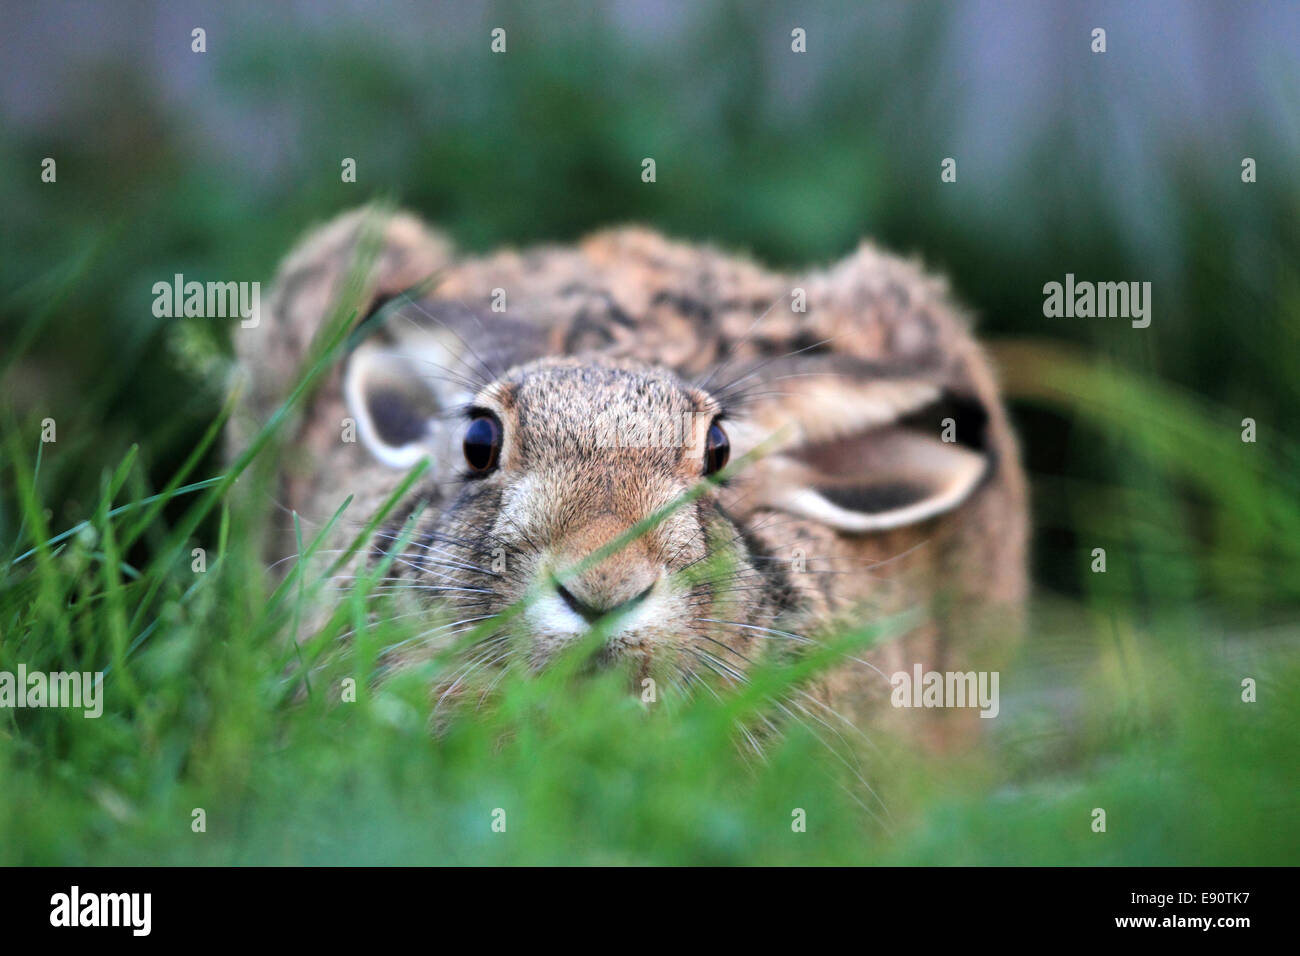 European Hare or Brown Hare Stock Photo